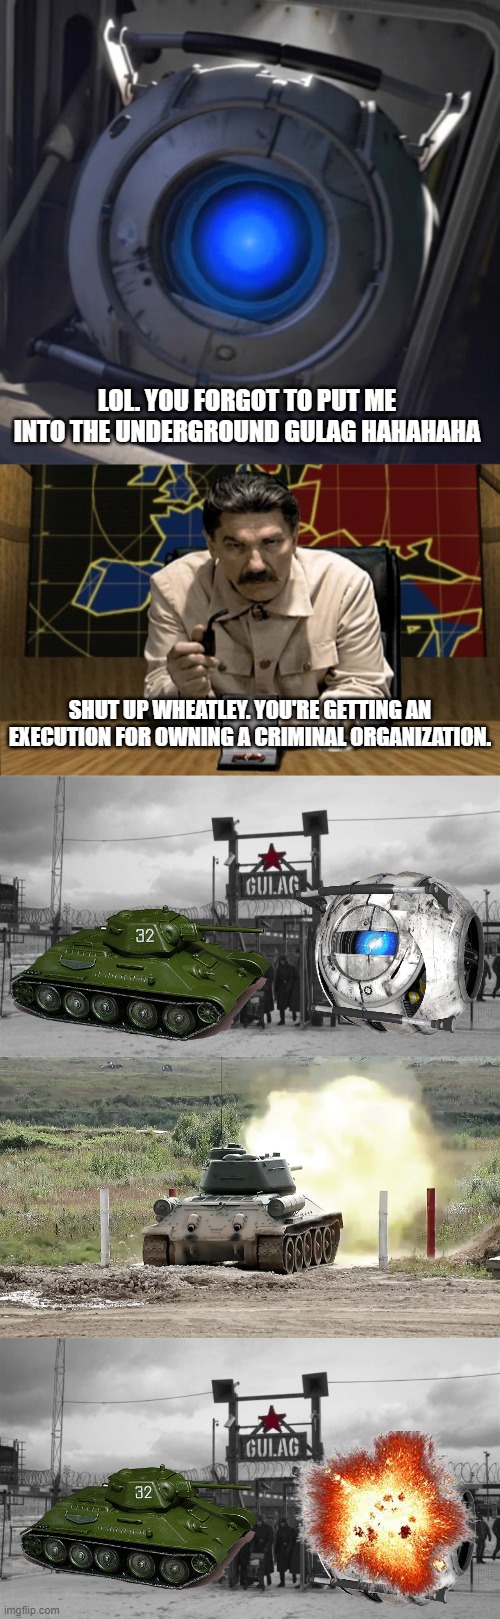 LOL. YOU FORGOT TO PUT ME INTO THE UNDERGROUND GULAG HAHAHAHA; SHUT UP WHEATLEY. YOU'RE GETTING AN EXECUTION FOR OWNING A CRIMINAL ORGANIZATION. | image tagged in wheatley,red alert stalin,gulag,stalin,joseph stalin,team krewfam | made w/ Imgflip meme maker